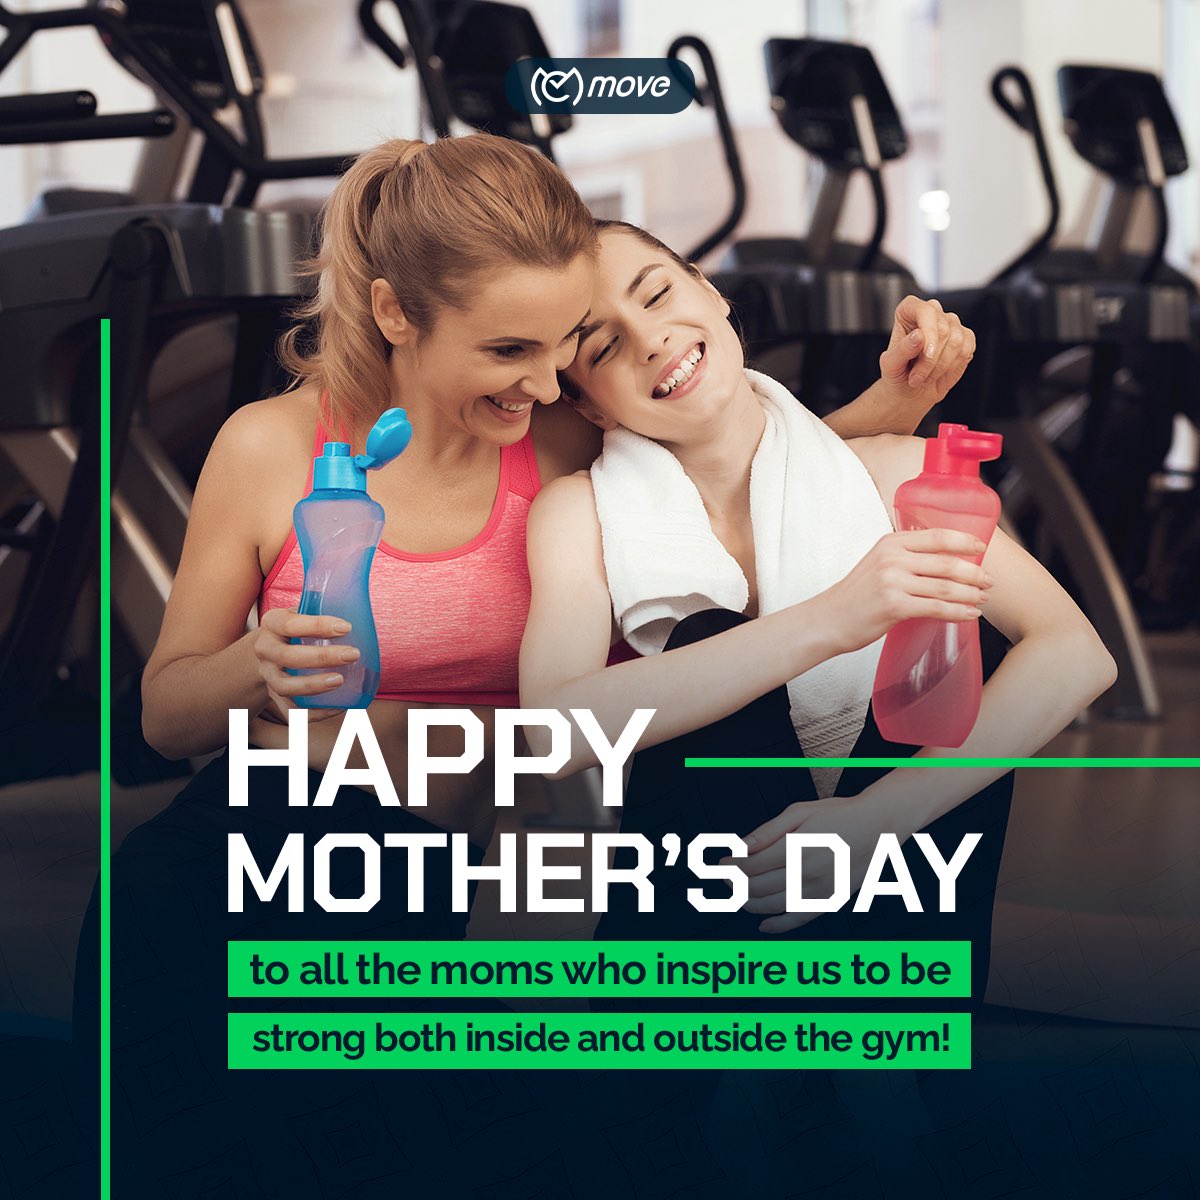 Move wishes all the moms out there a HAPPY MOTHER'S DAY! 💚

#MothersDay #InfiniteLove #MoveApp #HappyMothersDay #FitnessMom #Fitness #PhysicalExercise #PhysicalActivity #FitnessRevolution #Health #Wellness #App